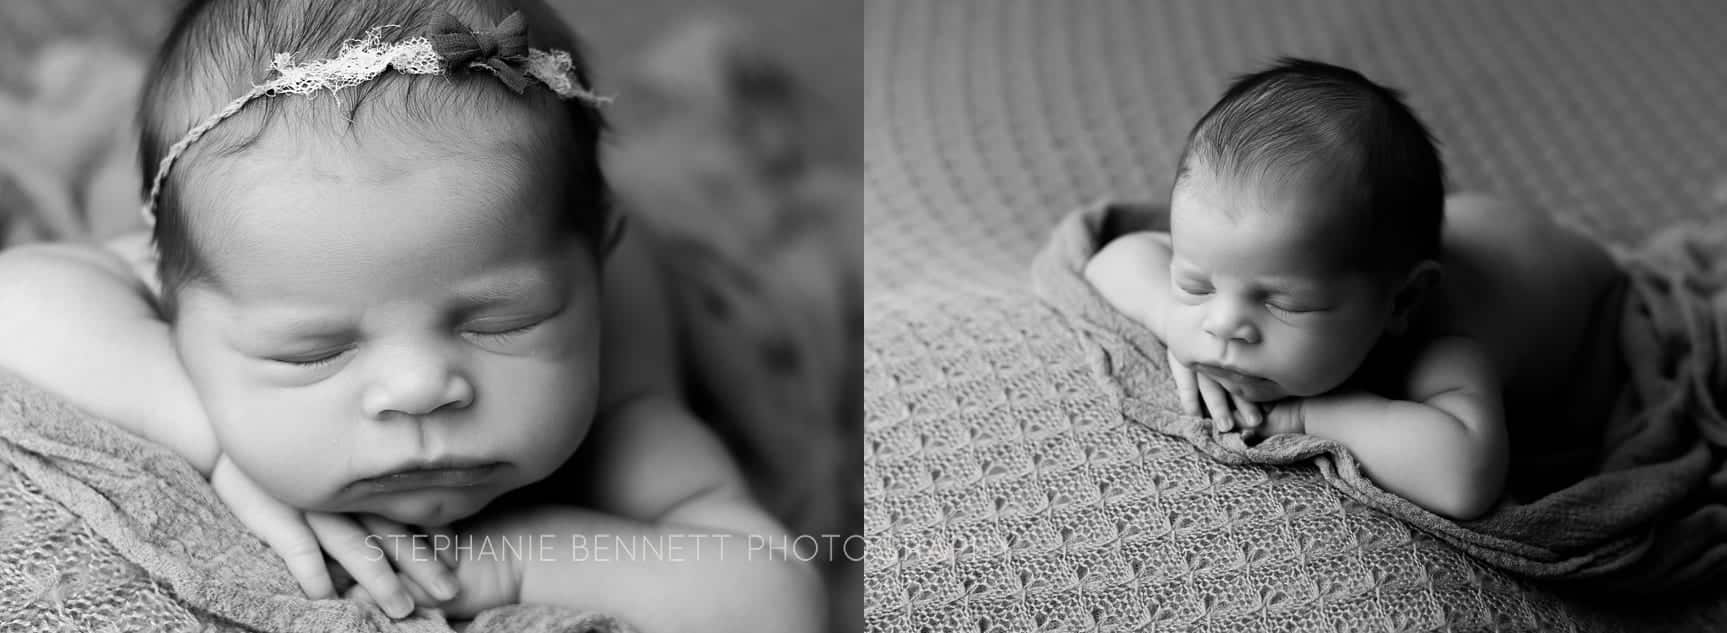 Newborn photography lakeville mn baby girls black and white